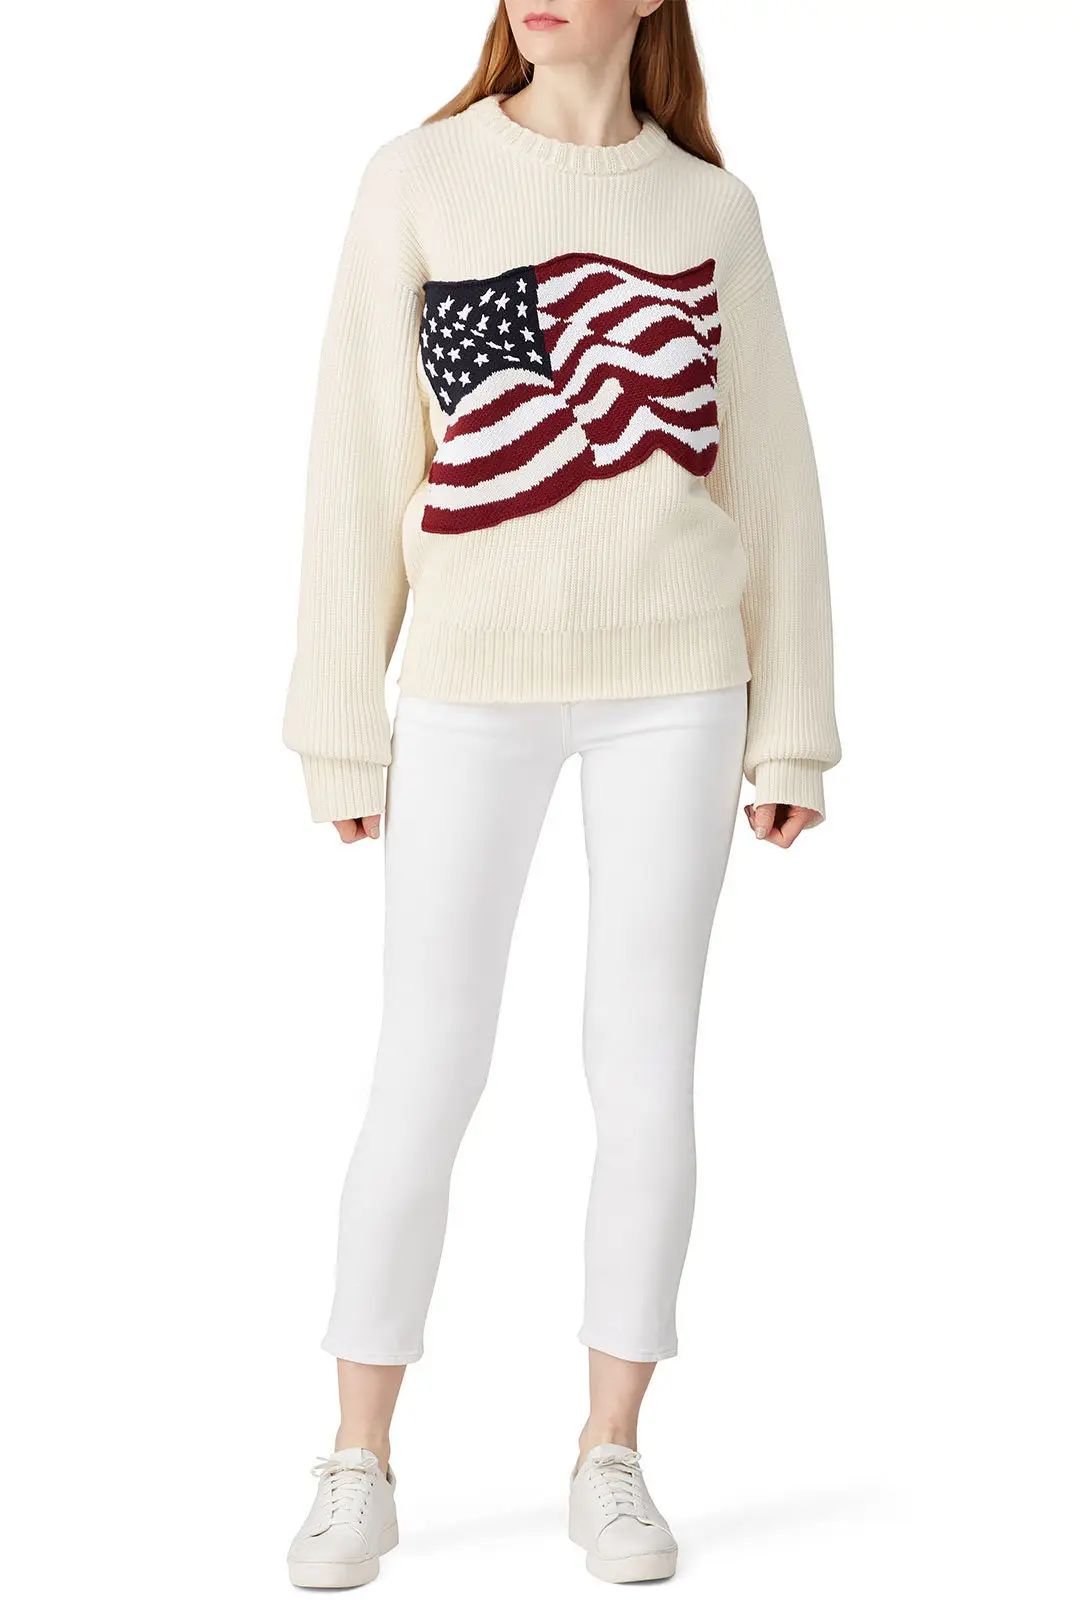 Tommy Hilfiger Ribbed Flag Sweater | Rent The Runway